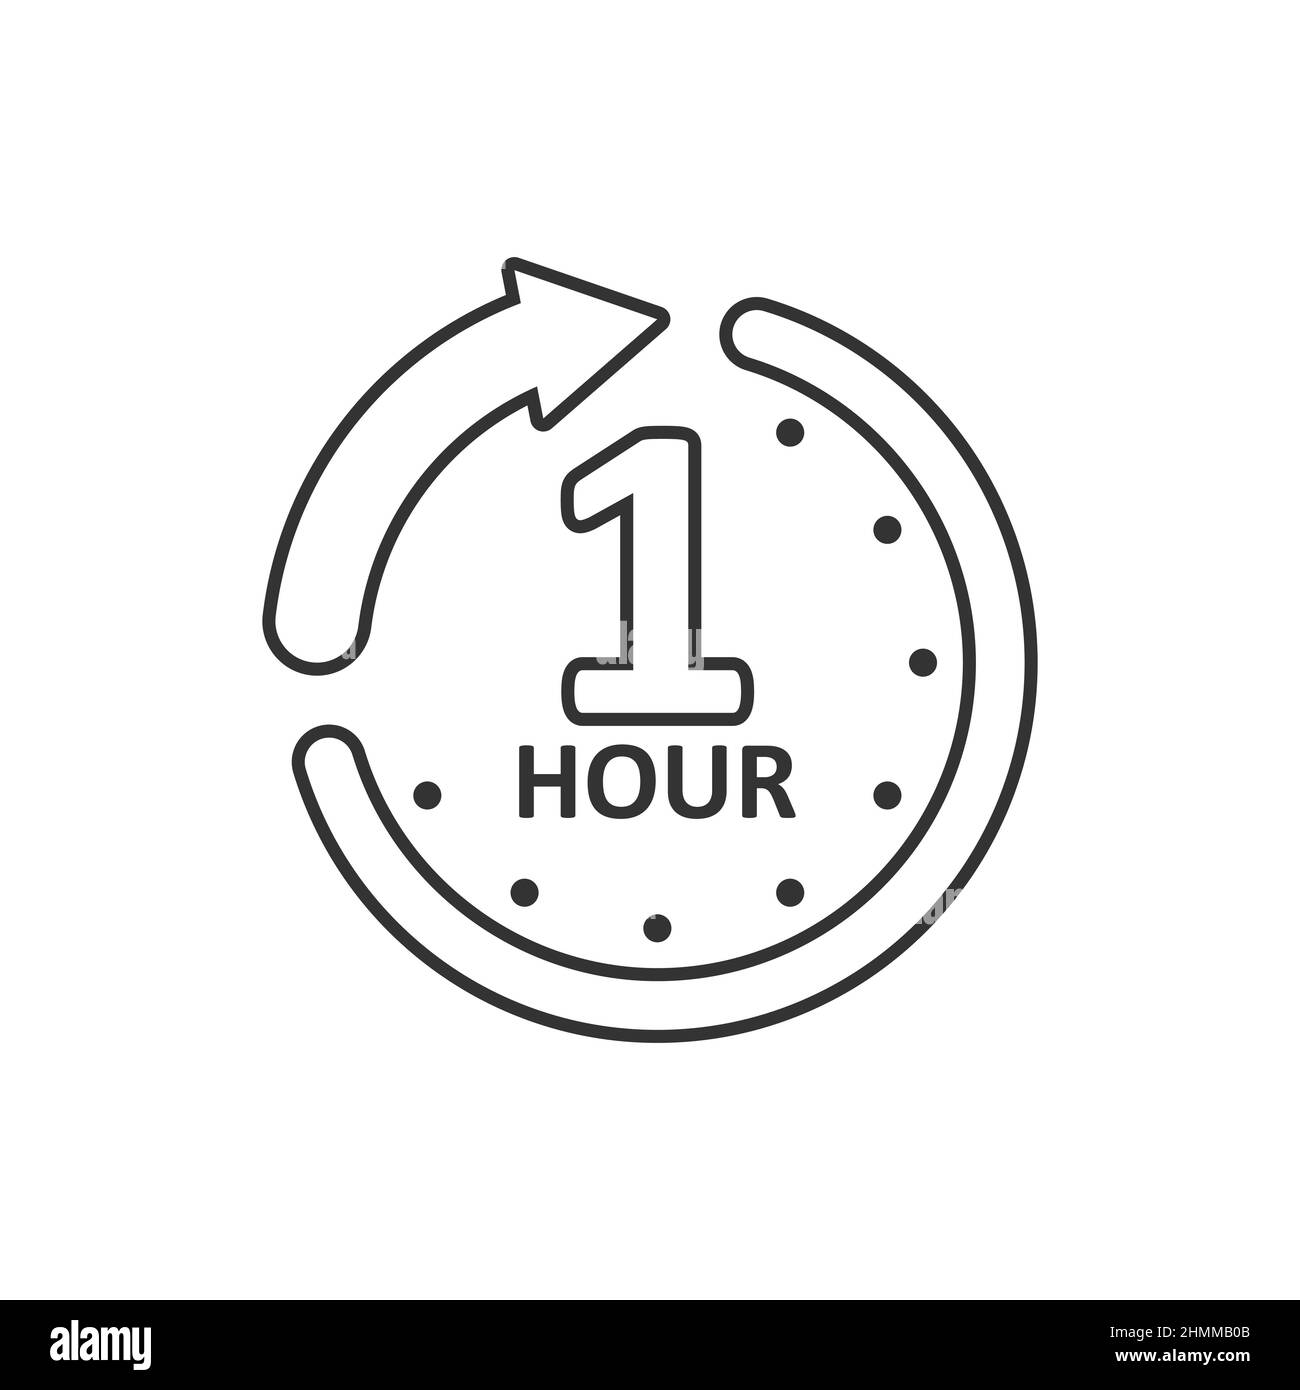 https://c8.alamy.com/comp/2HMMB0B/1-hour-clock-icon-in-flat-style-timer-countdown-vector-illustration-on-isolated-background-time-measure-sign-business-concept-2HMMB0B.jpg